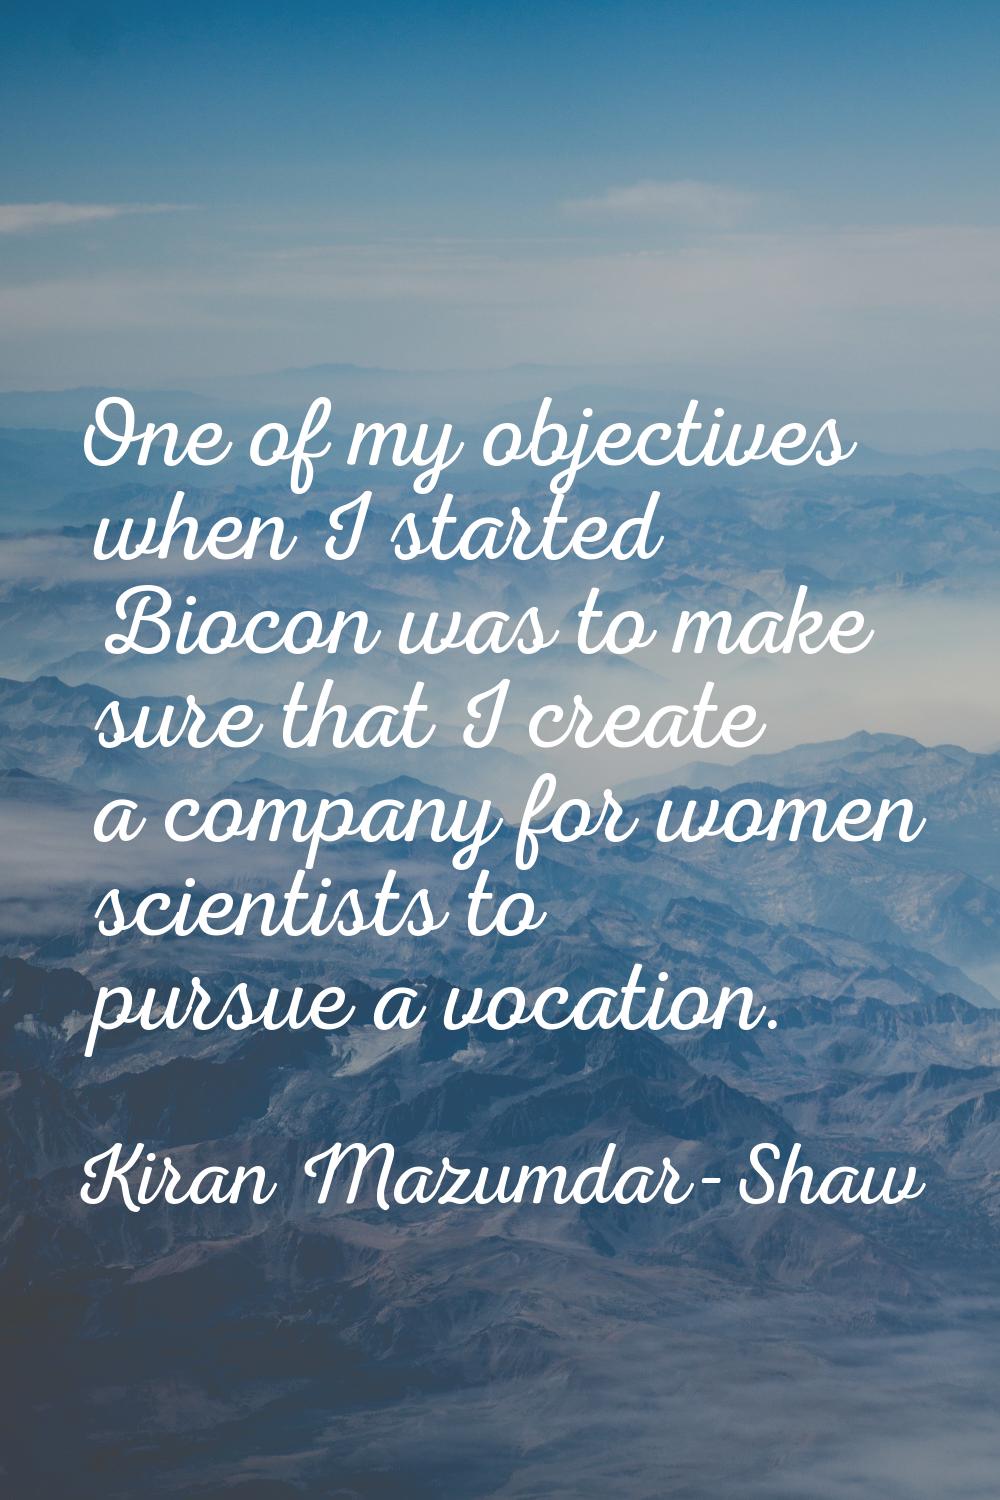 One of my objectives when I started Biocon was to make sure that I create a company for women scien